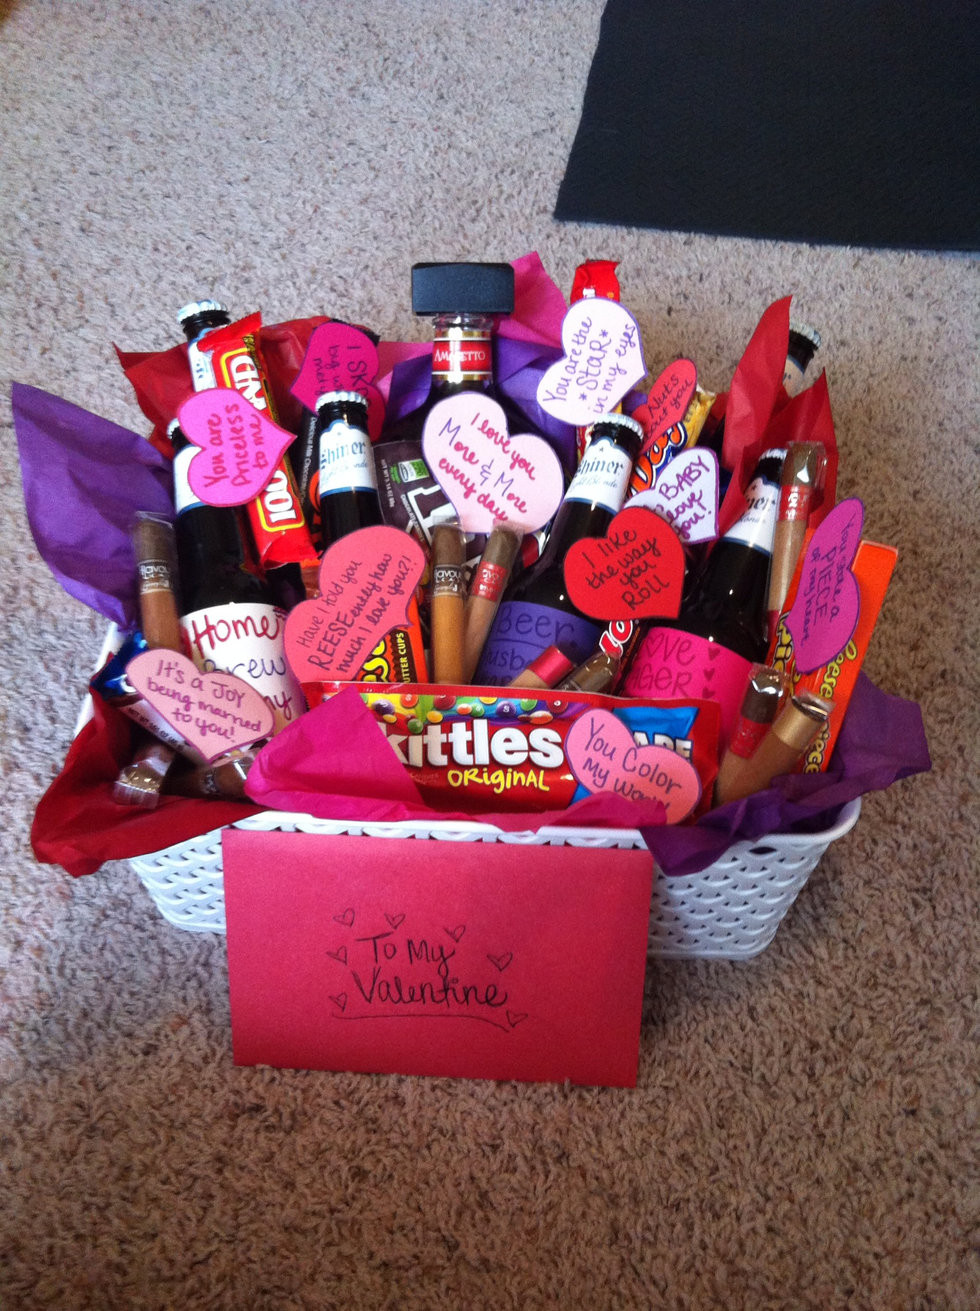 Cute Gift Basket Ideas
 6 Things You Should Be Getting Your Boo Valentine s Day